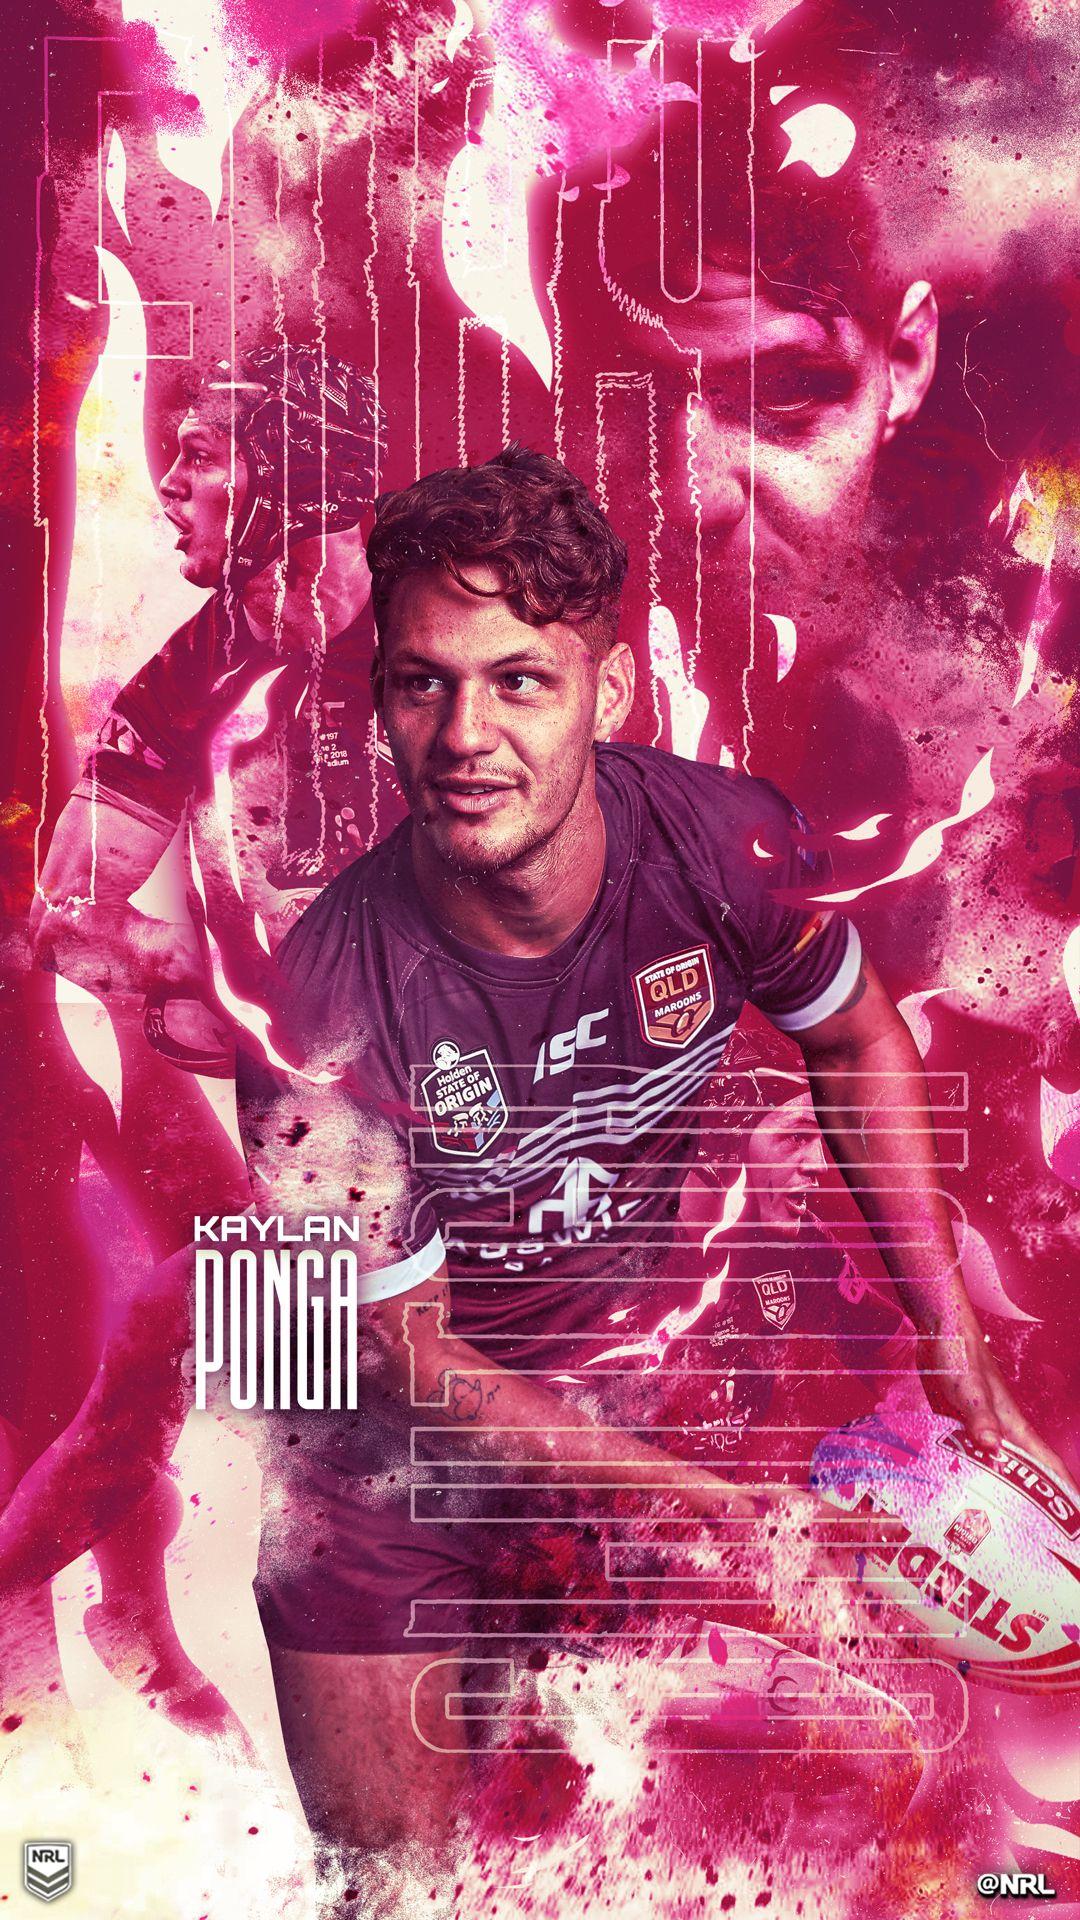 State of Origin Wallpaper Ponga. Nrl, Rugby wallpaper, Rugby poster